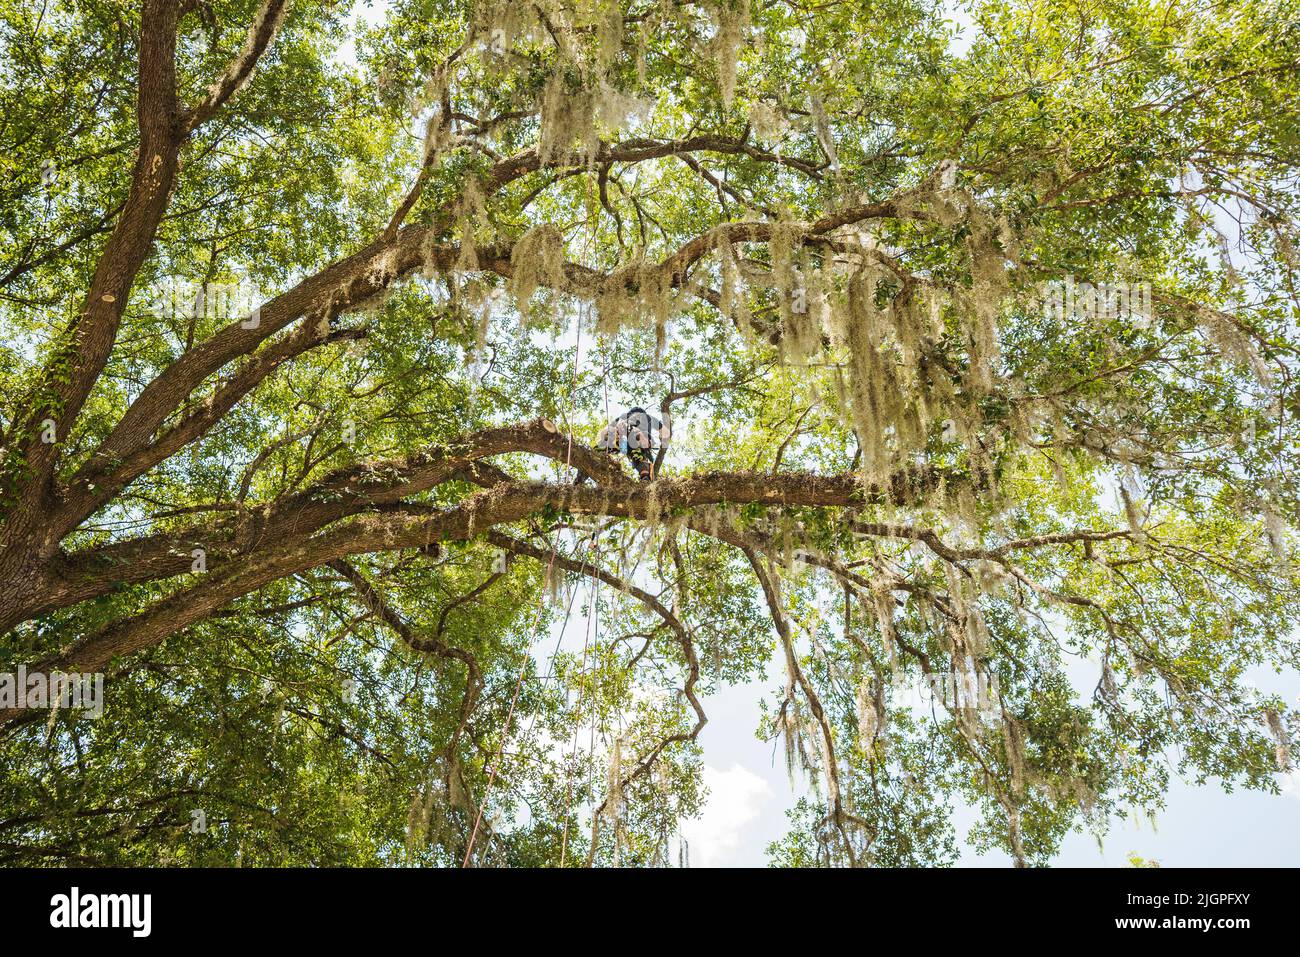 Men trimming tree branches off a huge, hundreds of years old live oak tree in North Central Florida. Stock Photo